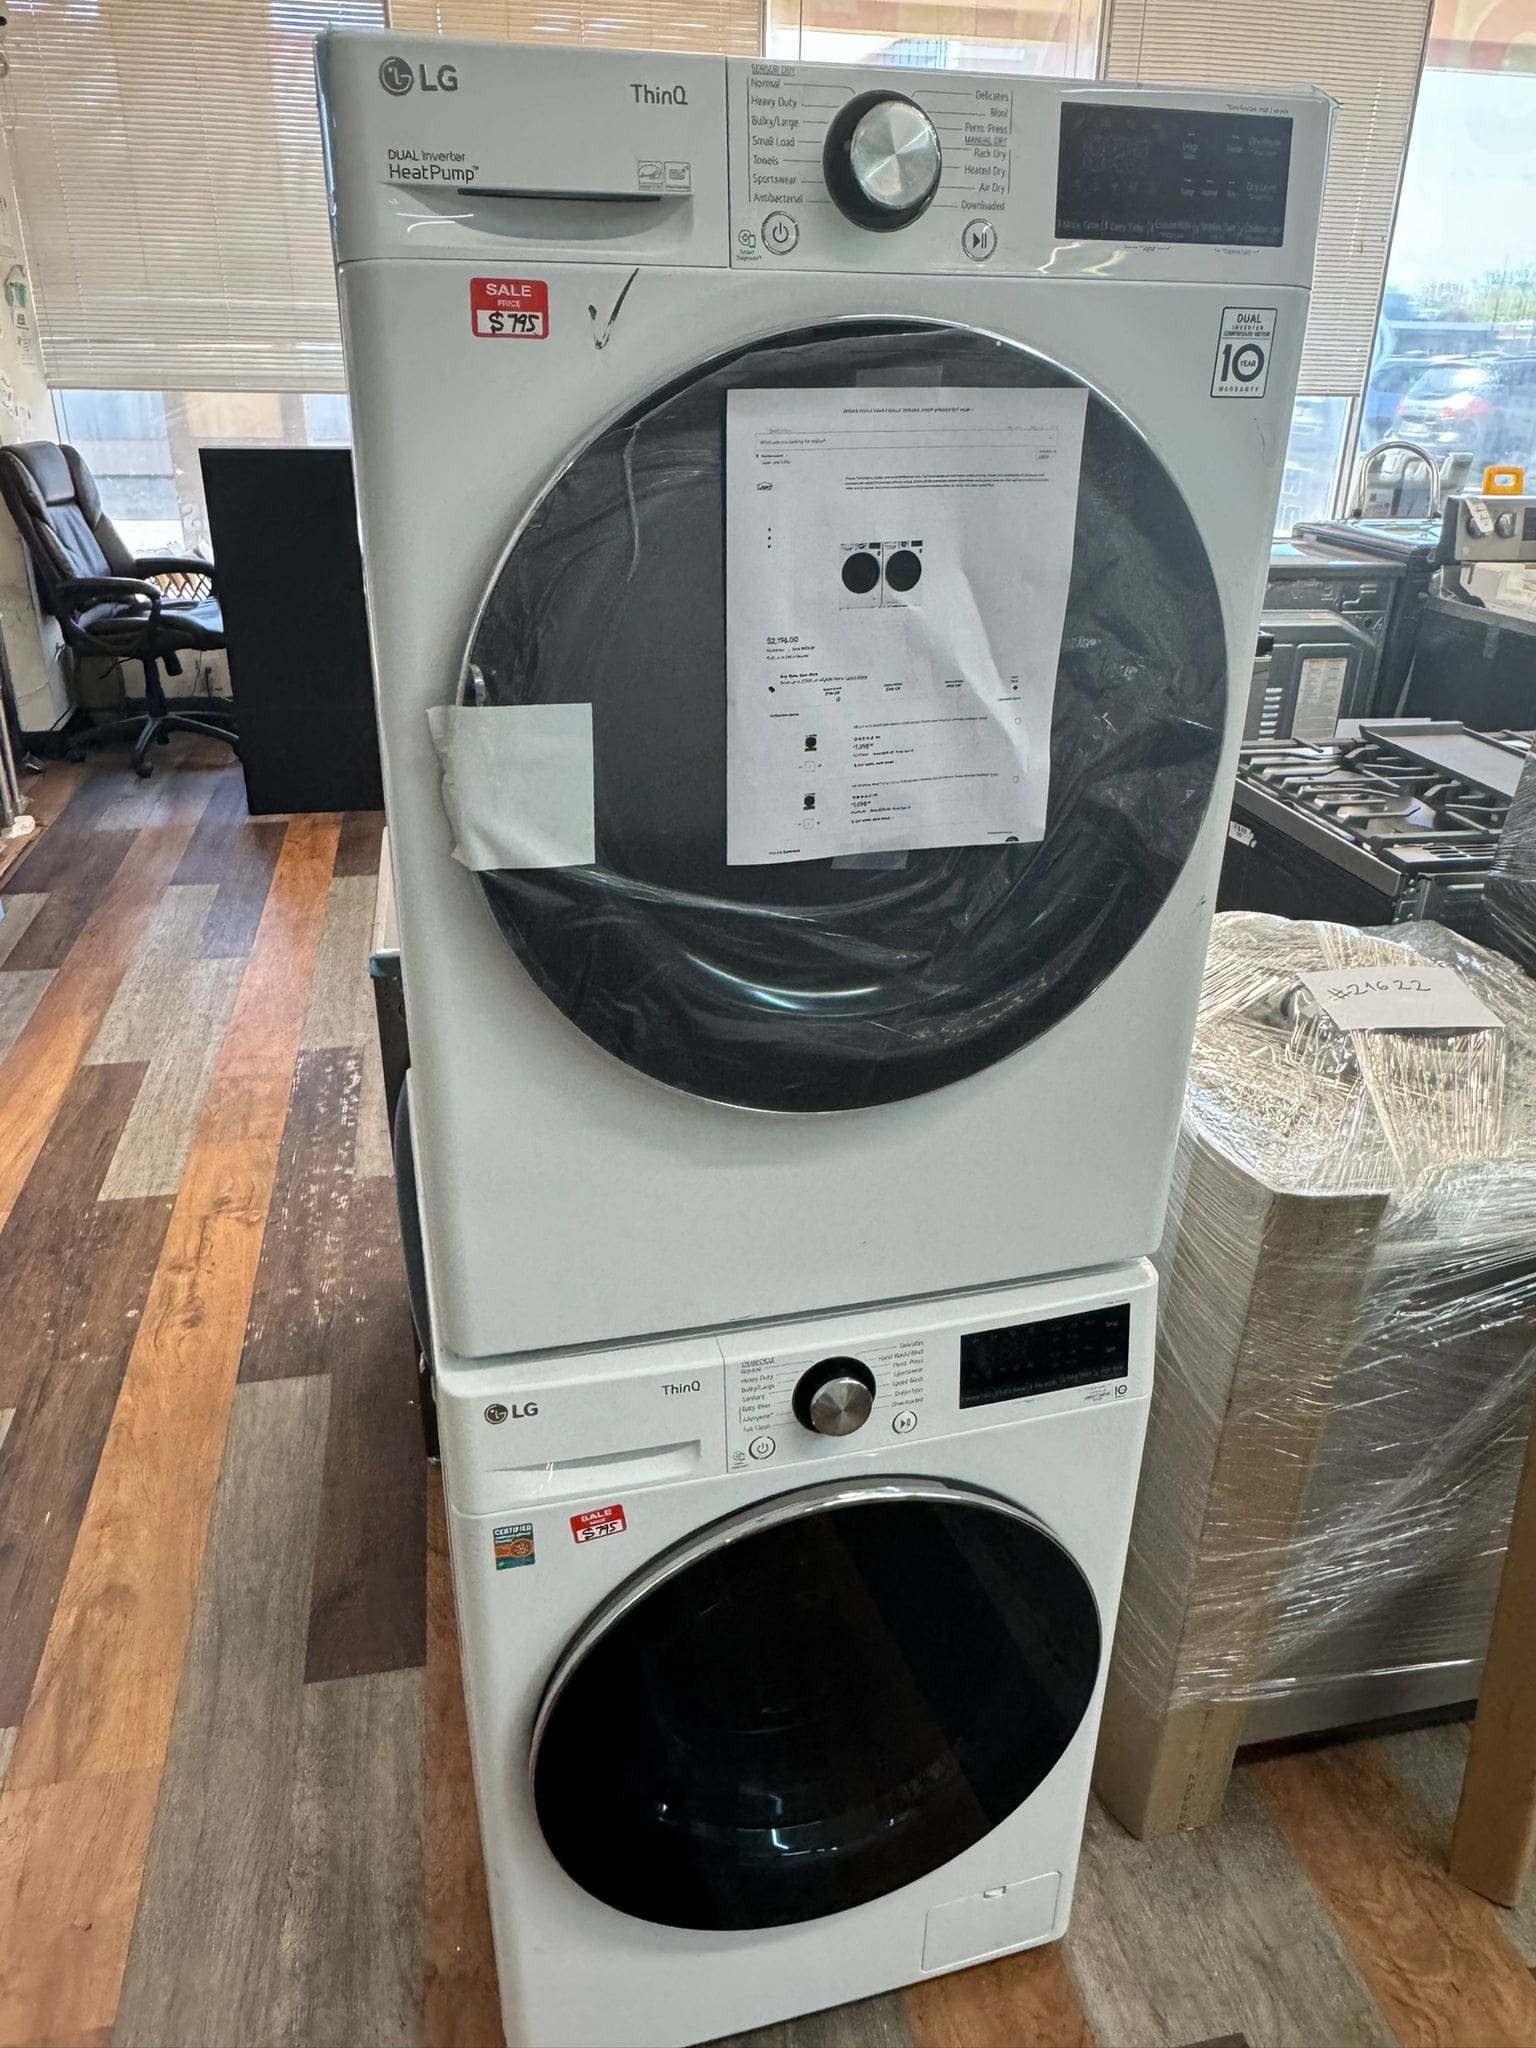 LG 24” NewCompact Size Washer and Ventless dryer – White